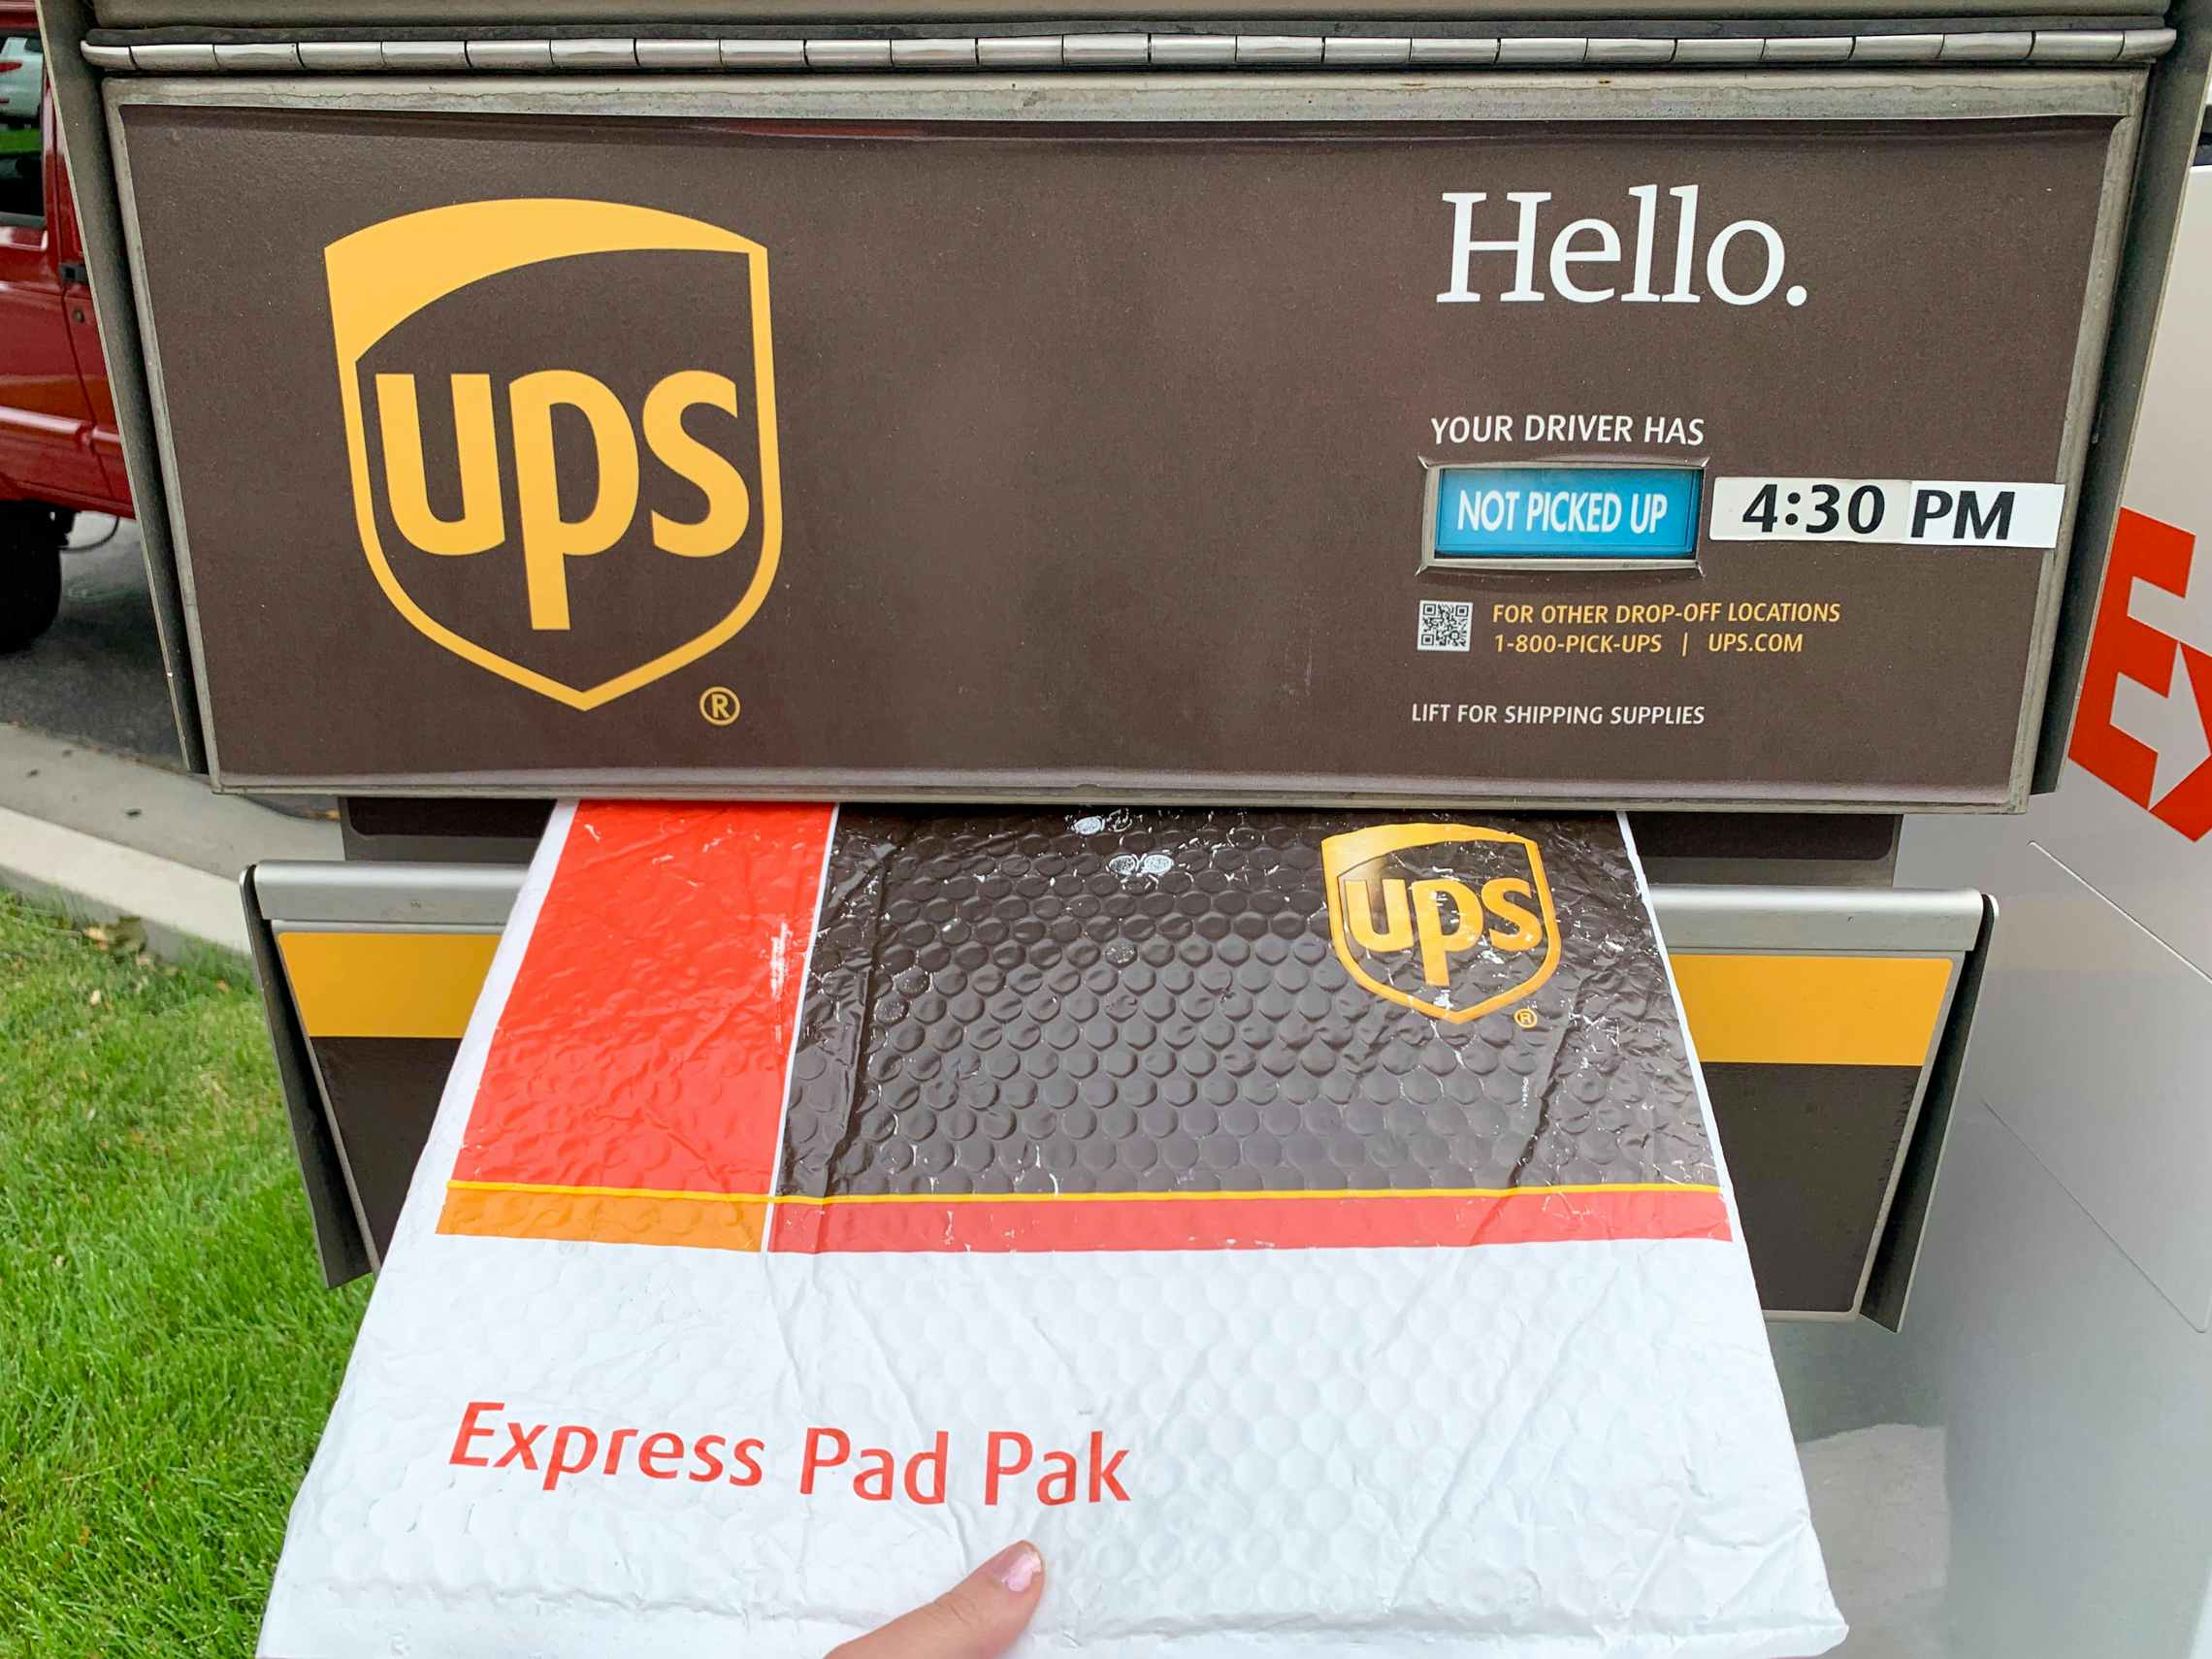 Ups package being dropped in a UPS mail box.